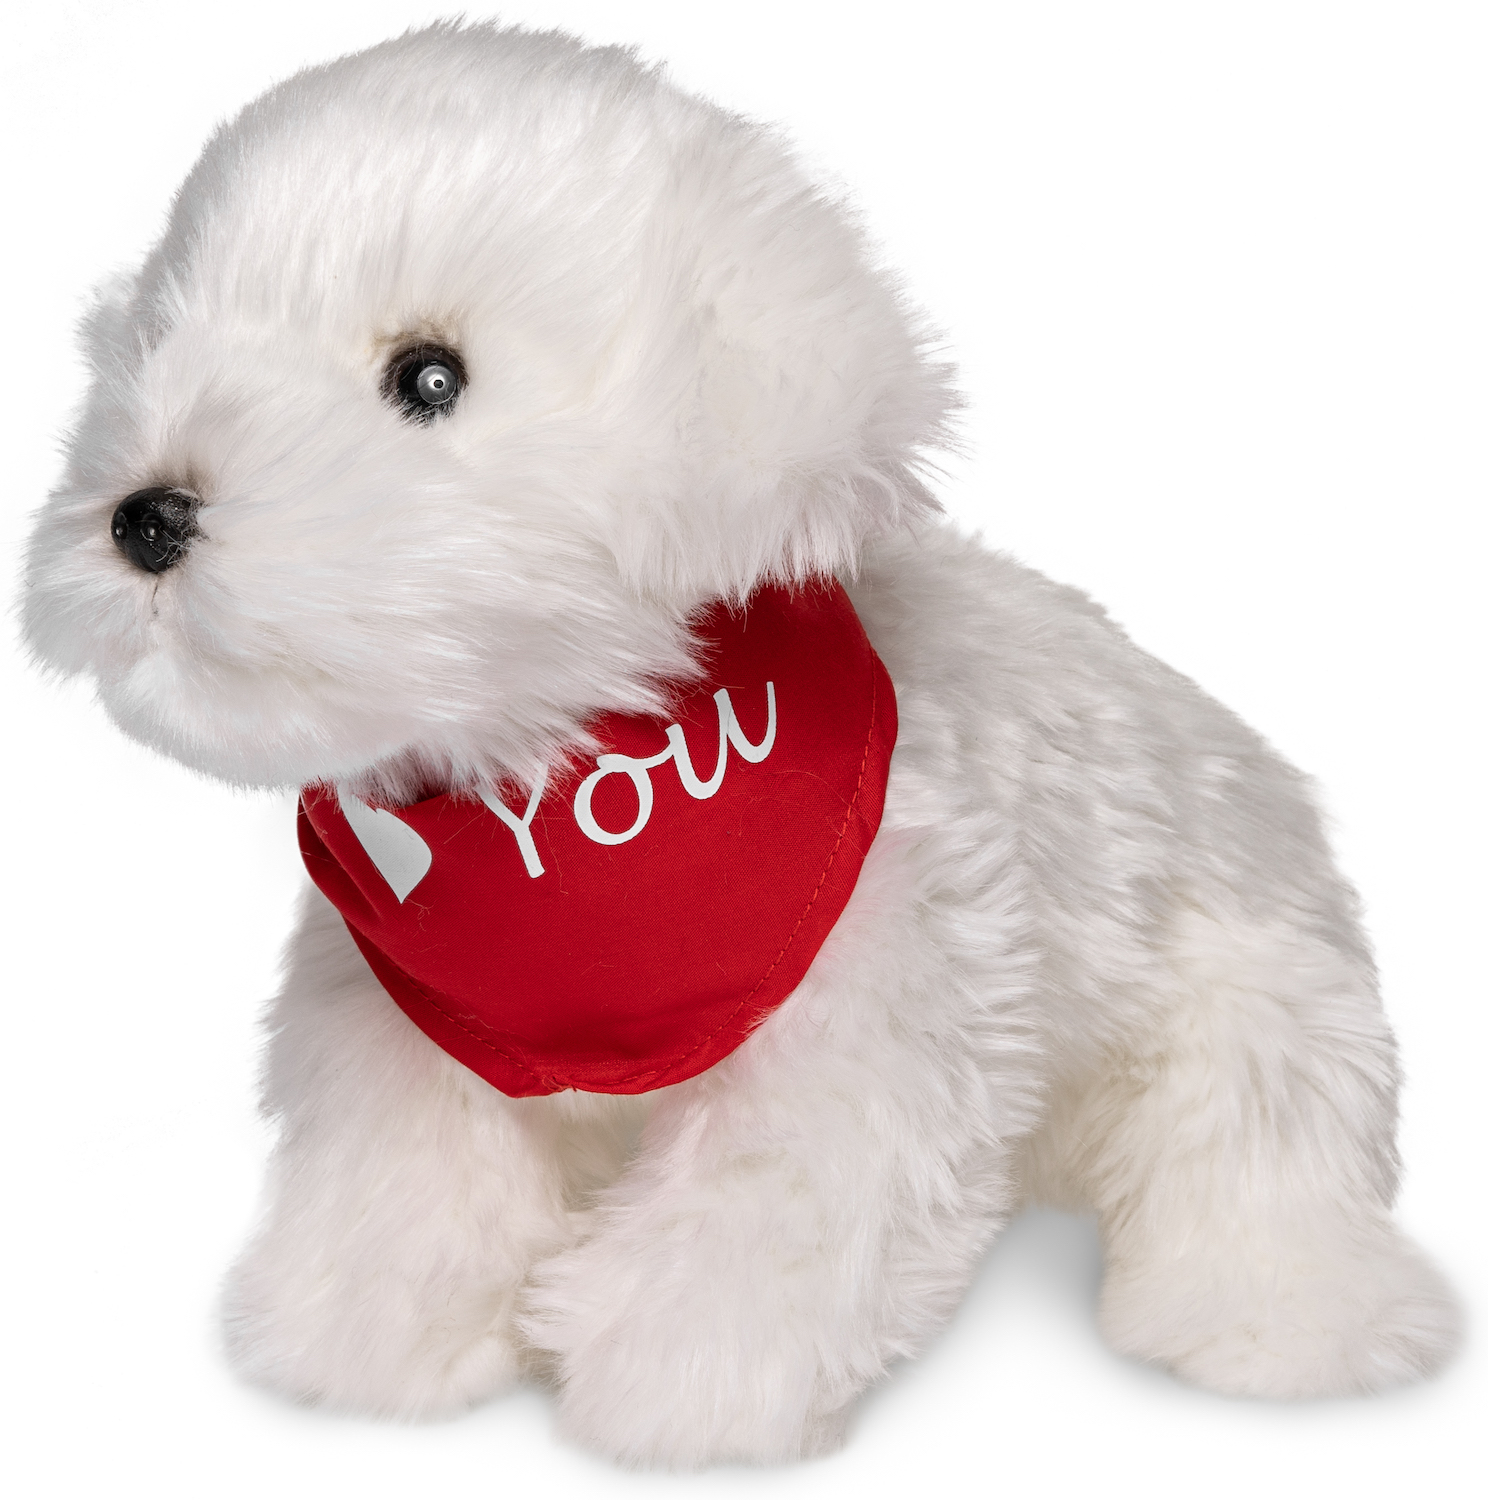 Maltese with scarf "I Love You"